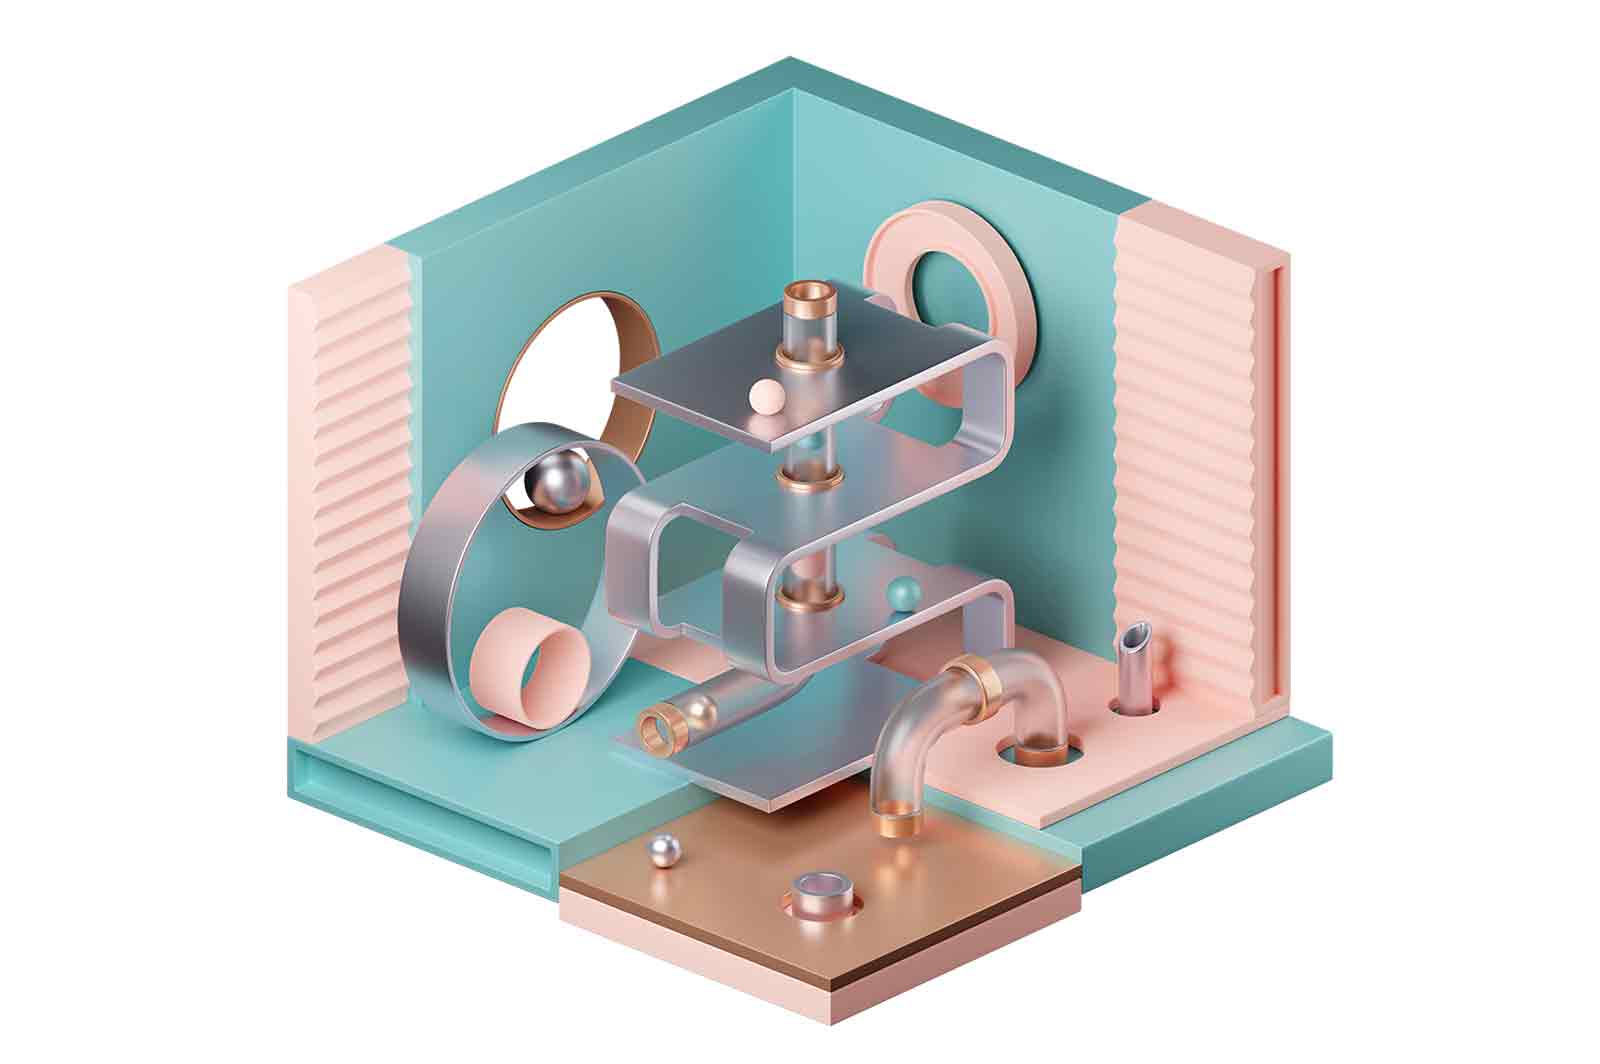 Abstract composition of details in pastel colors 3d rendered illustration. Ceramic, metal and plastic details. Components of single mechanism concept